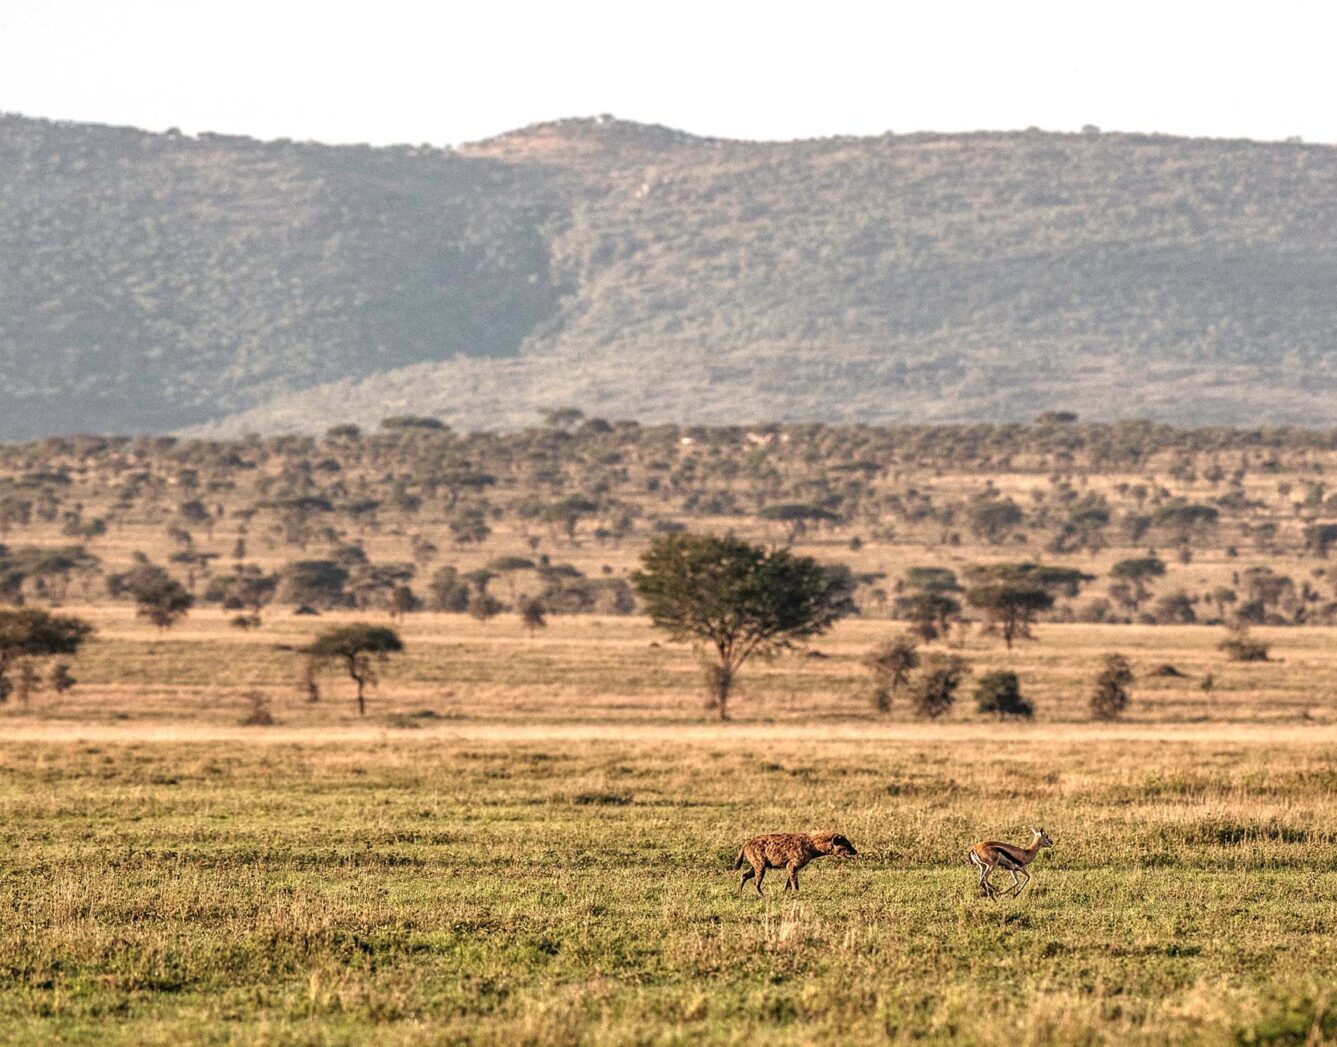 A hyena chases an antelope